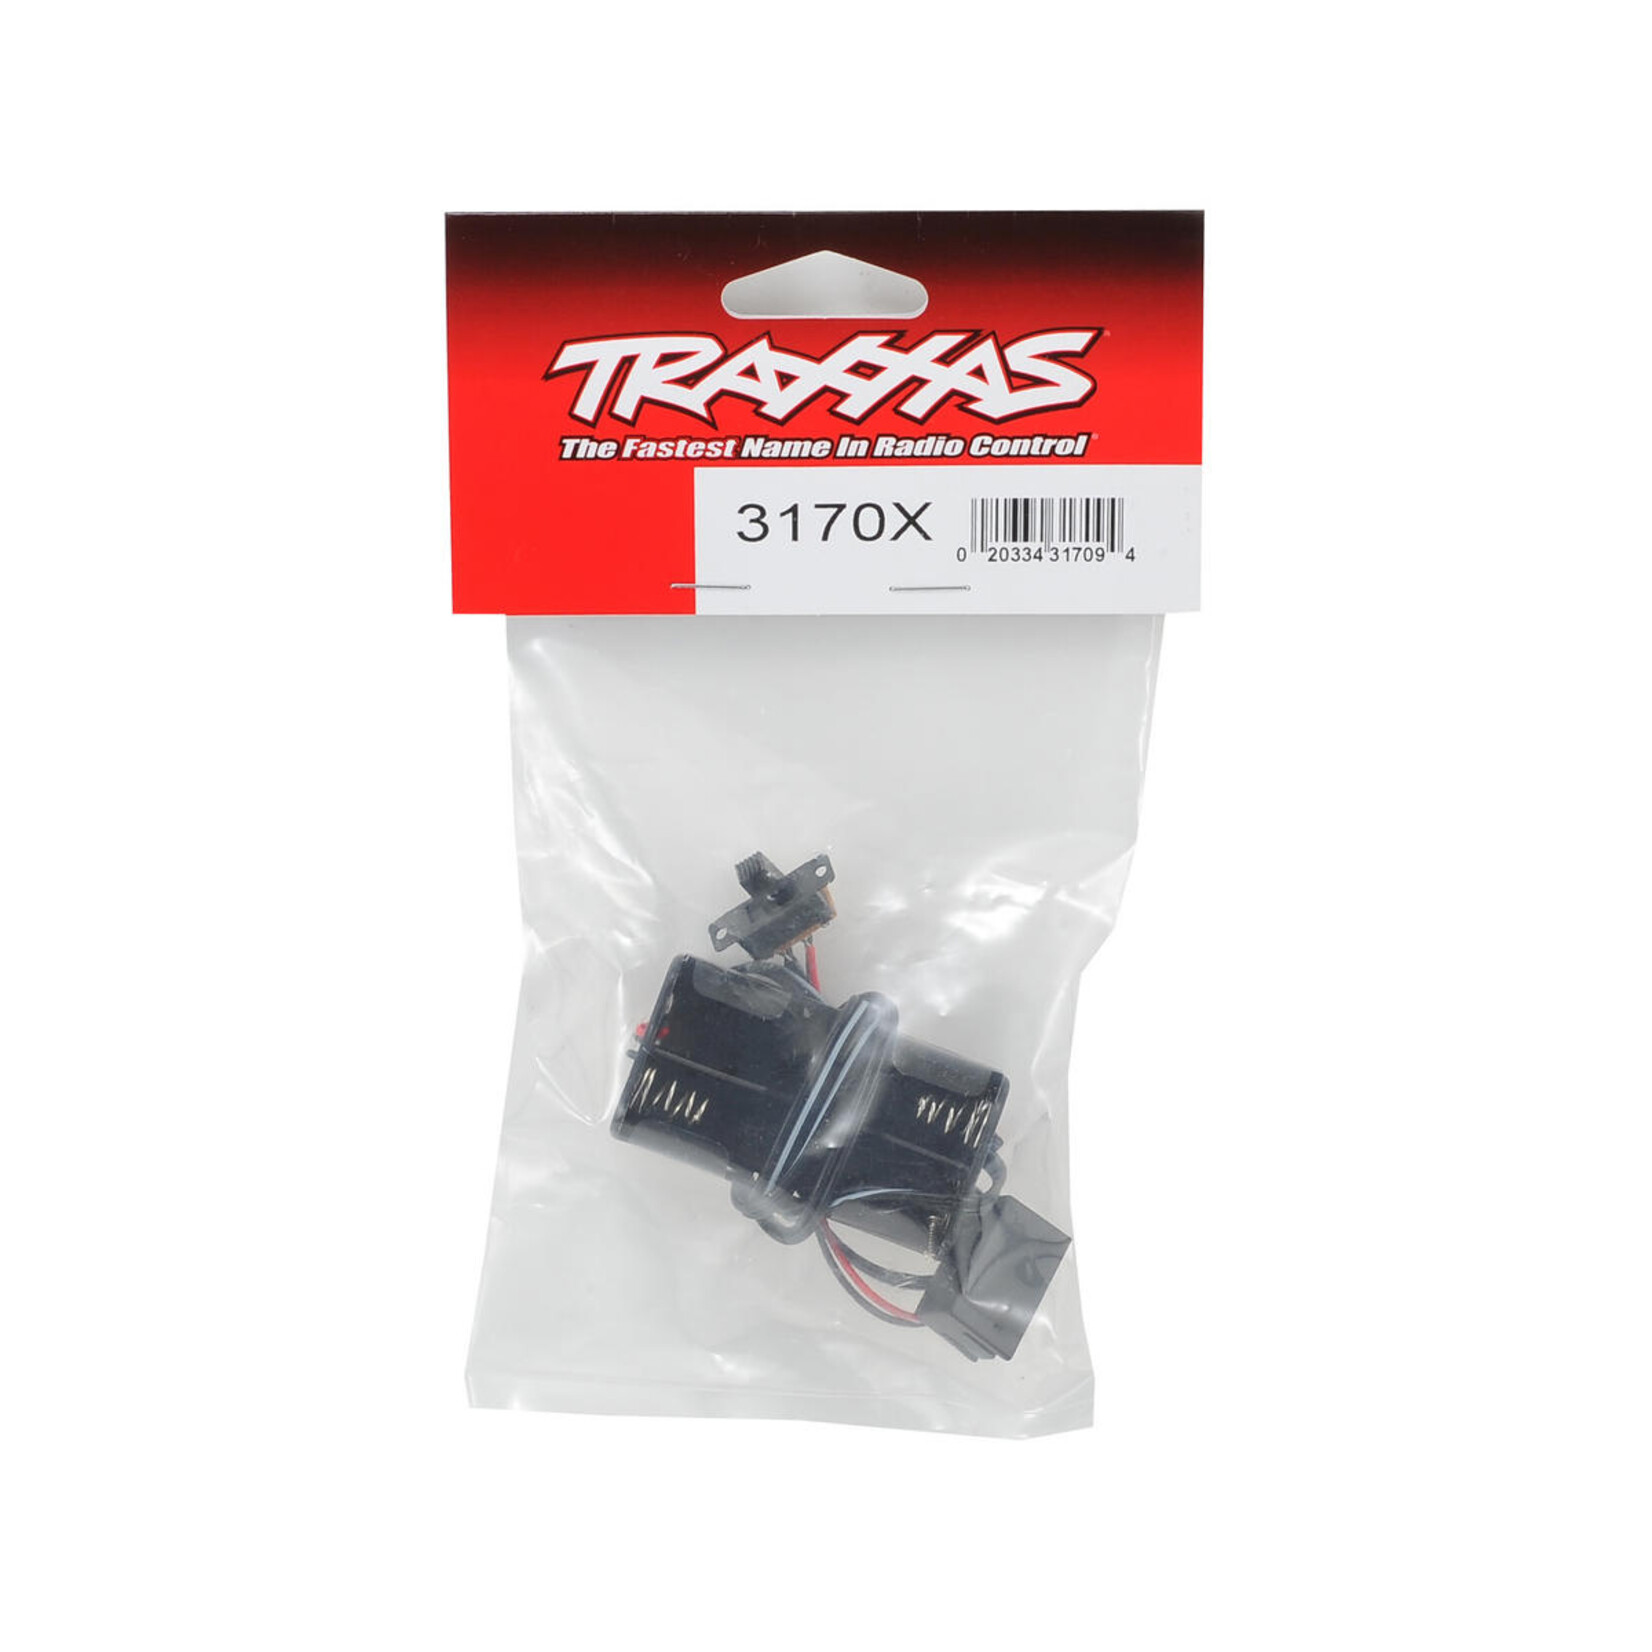 Traxxas Traxxas 4-Cell Battery Holder w/Switch #3170X